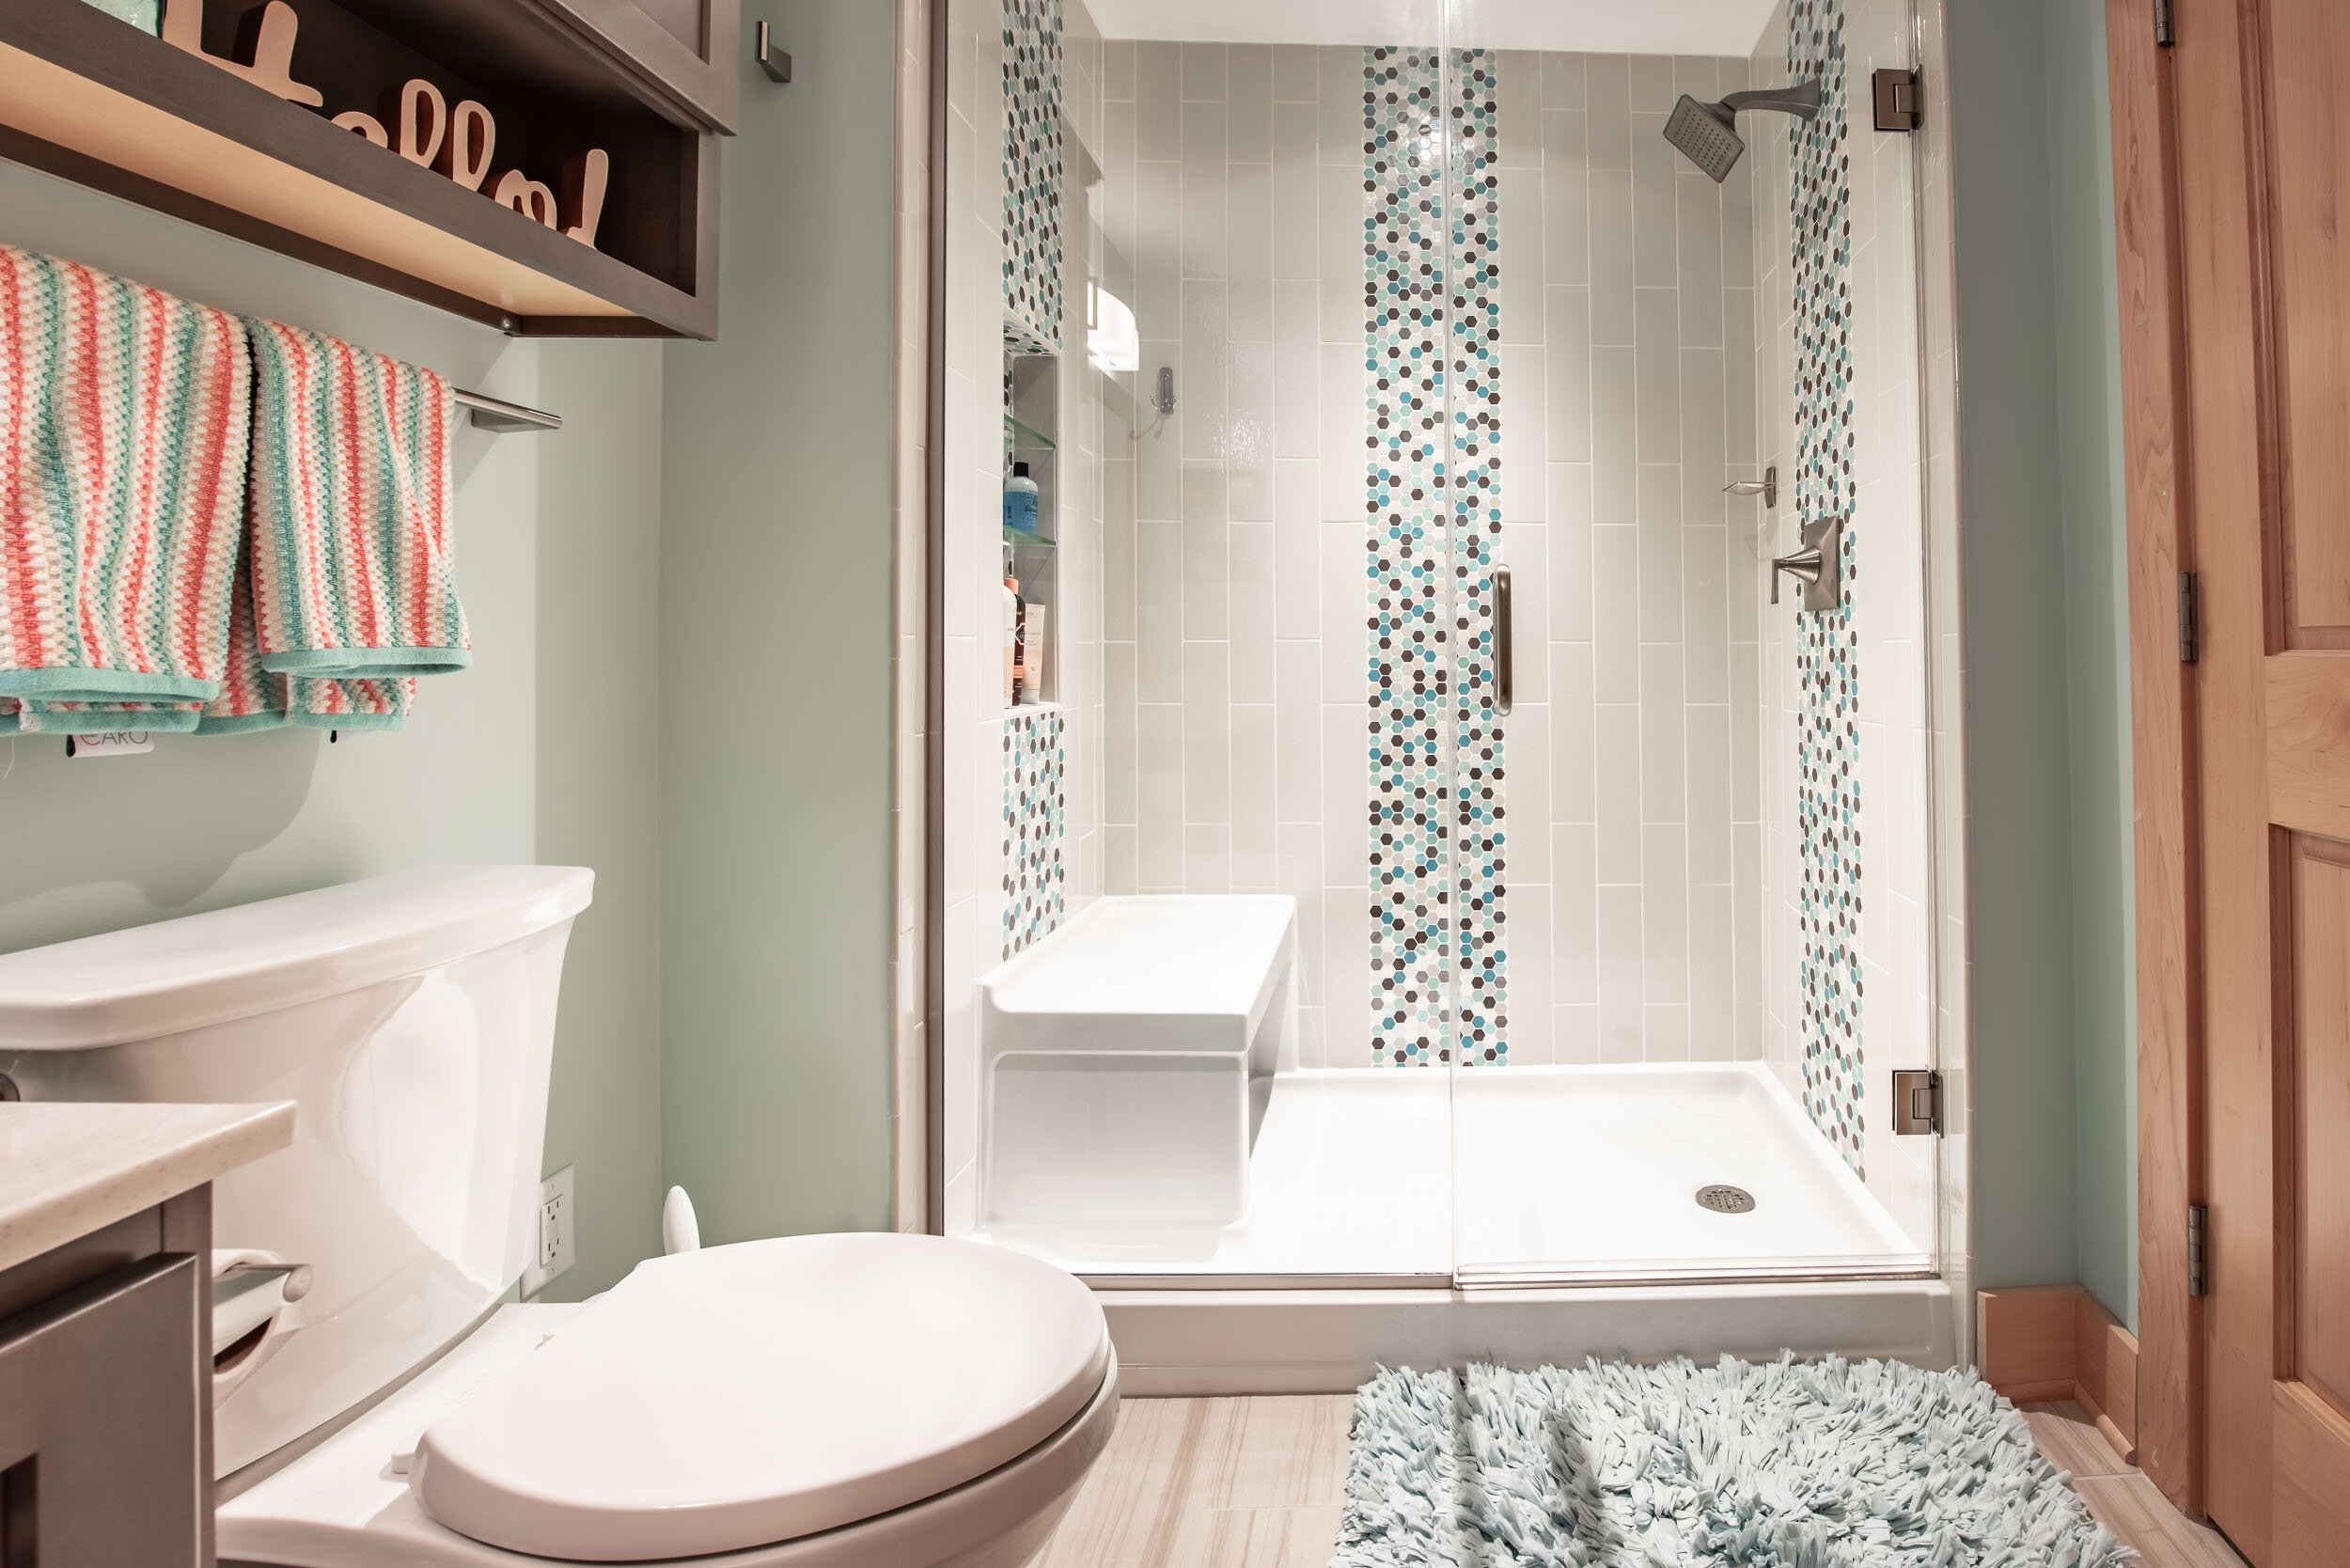 What To Know About Tub Shower, Easy Step Bathtub Shower Conversion